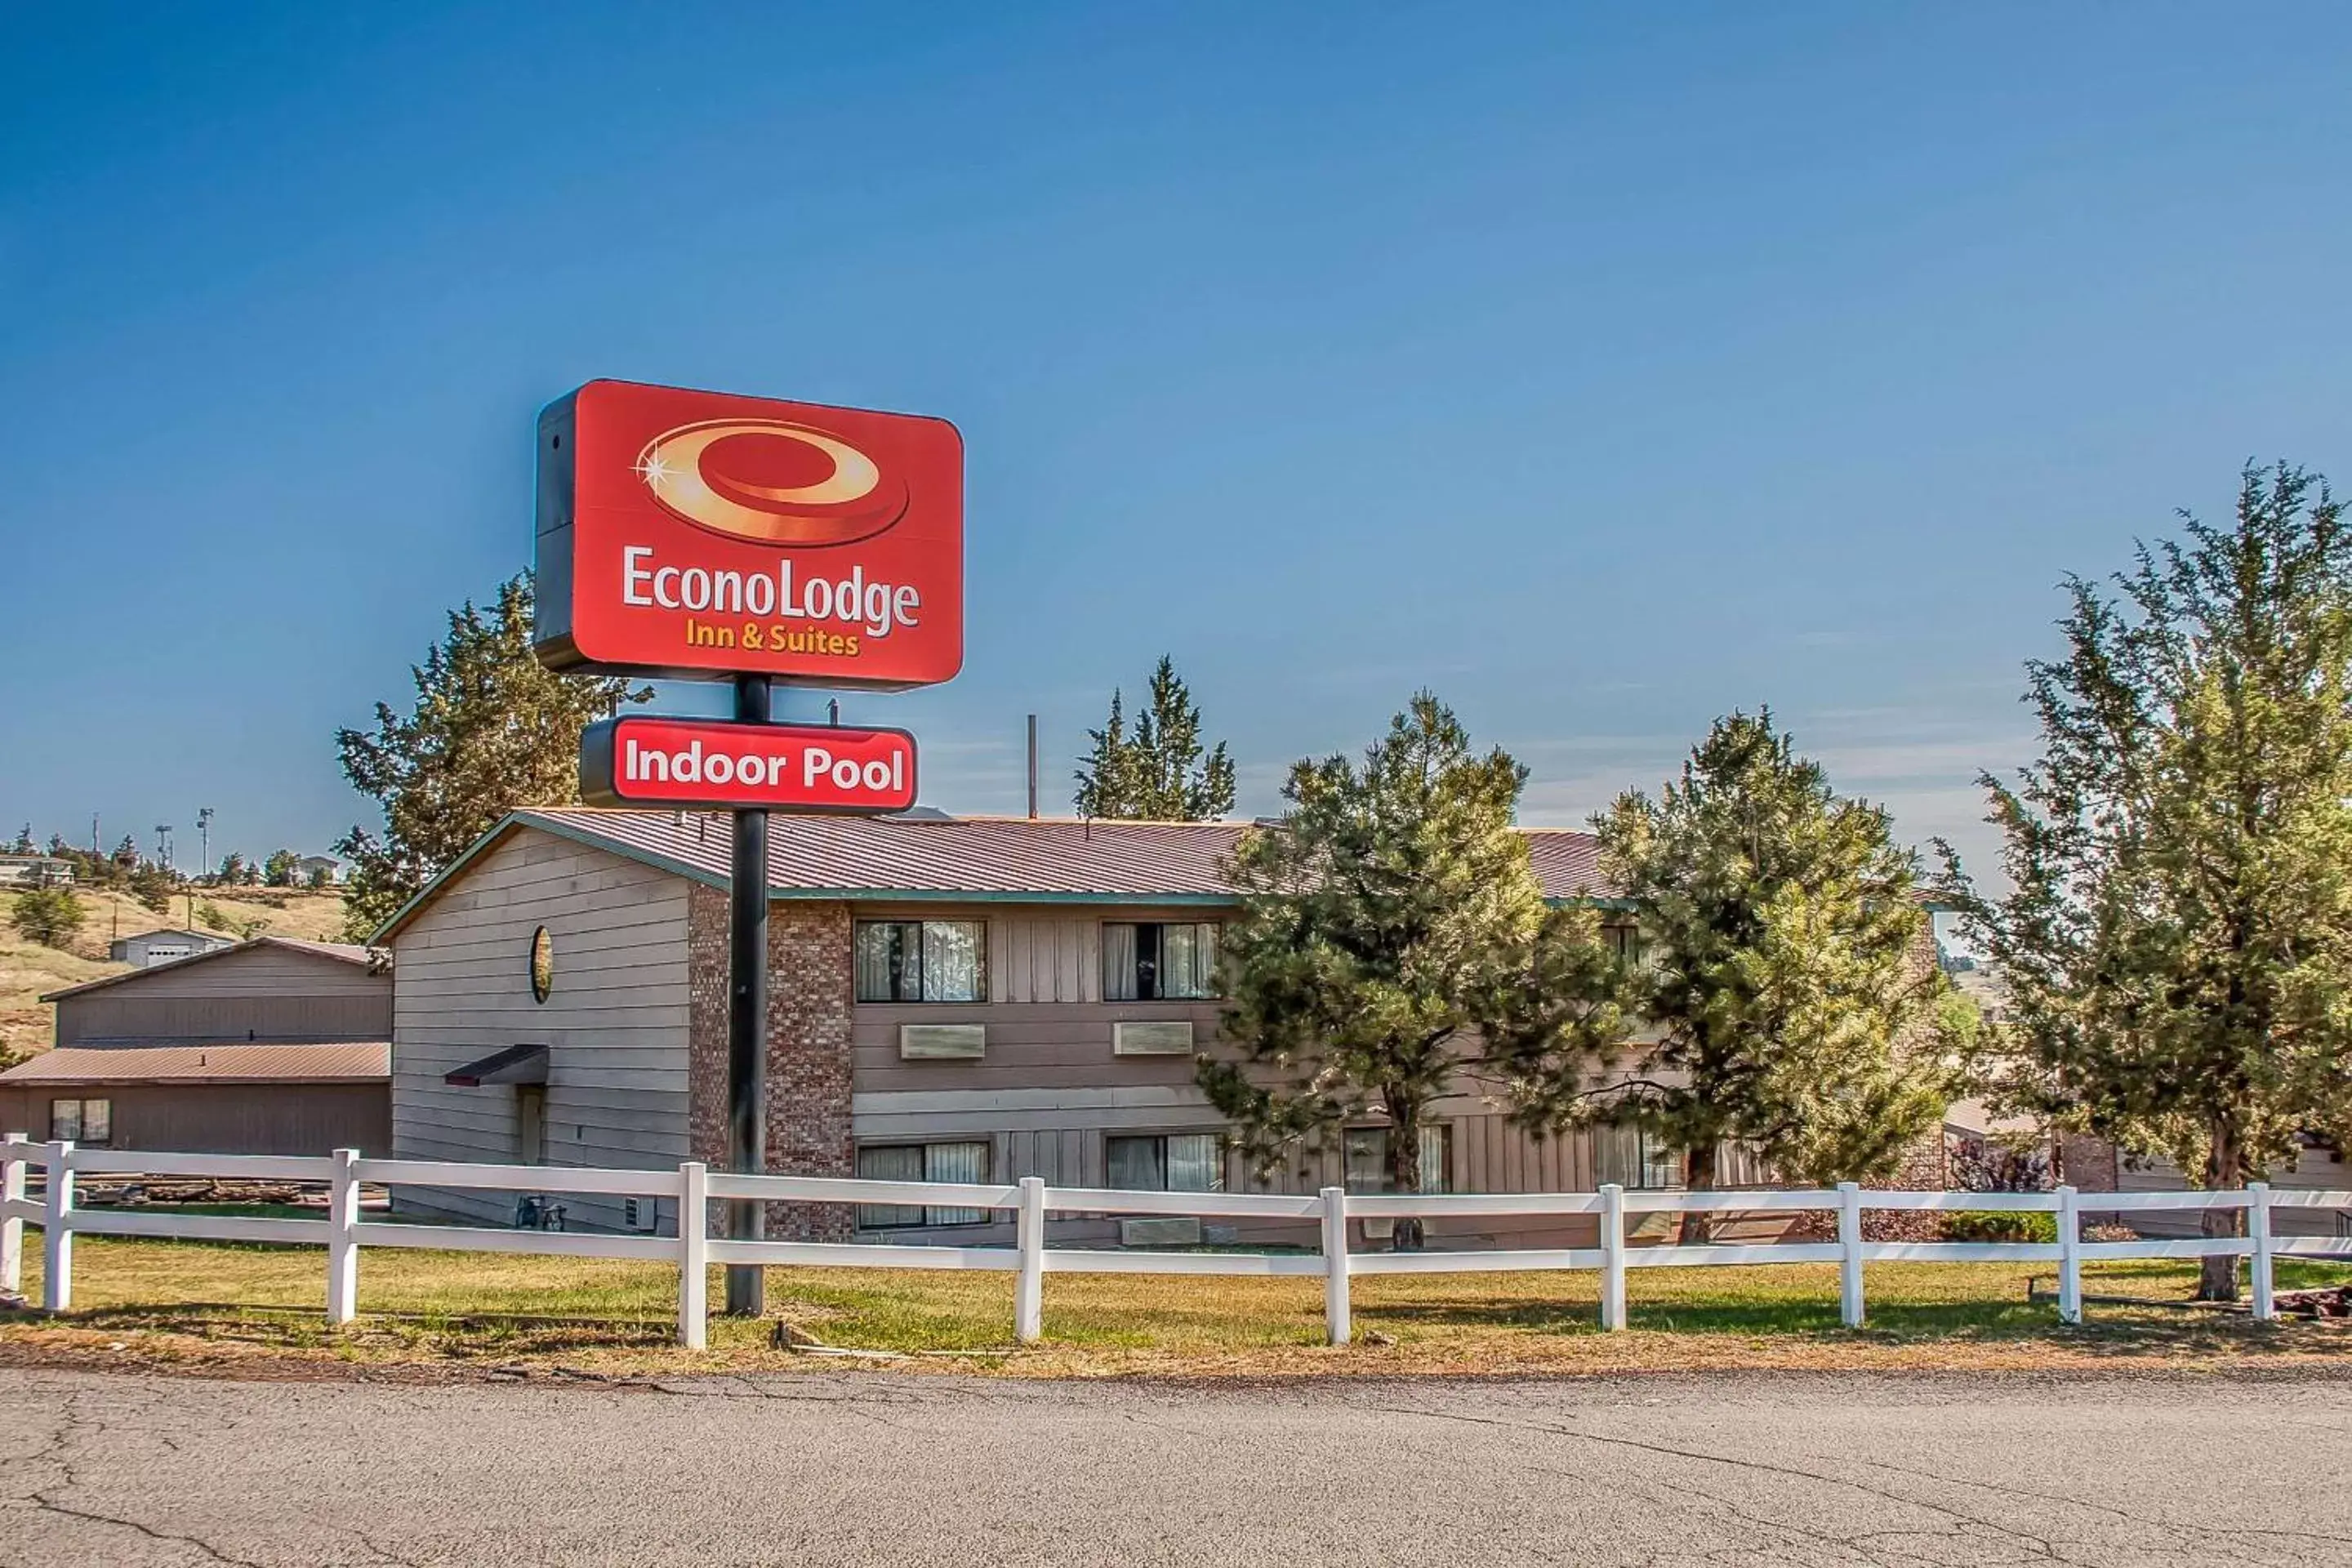 Property building in Econo Lodge Inn & Suites Madras